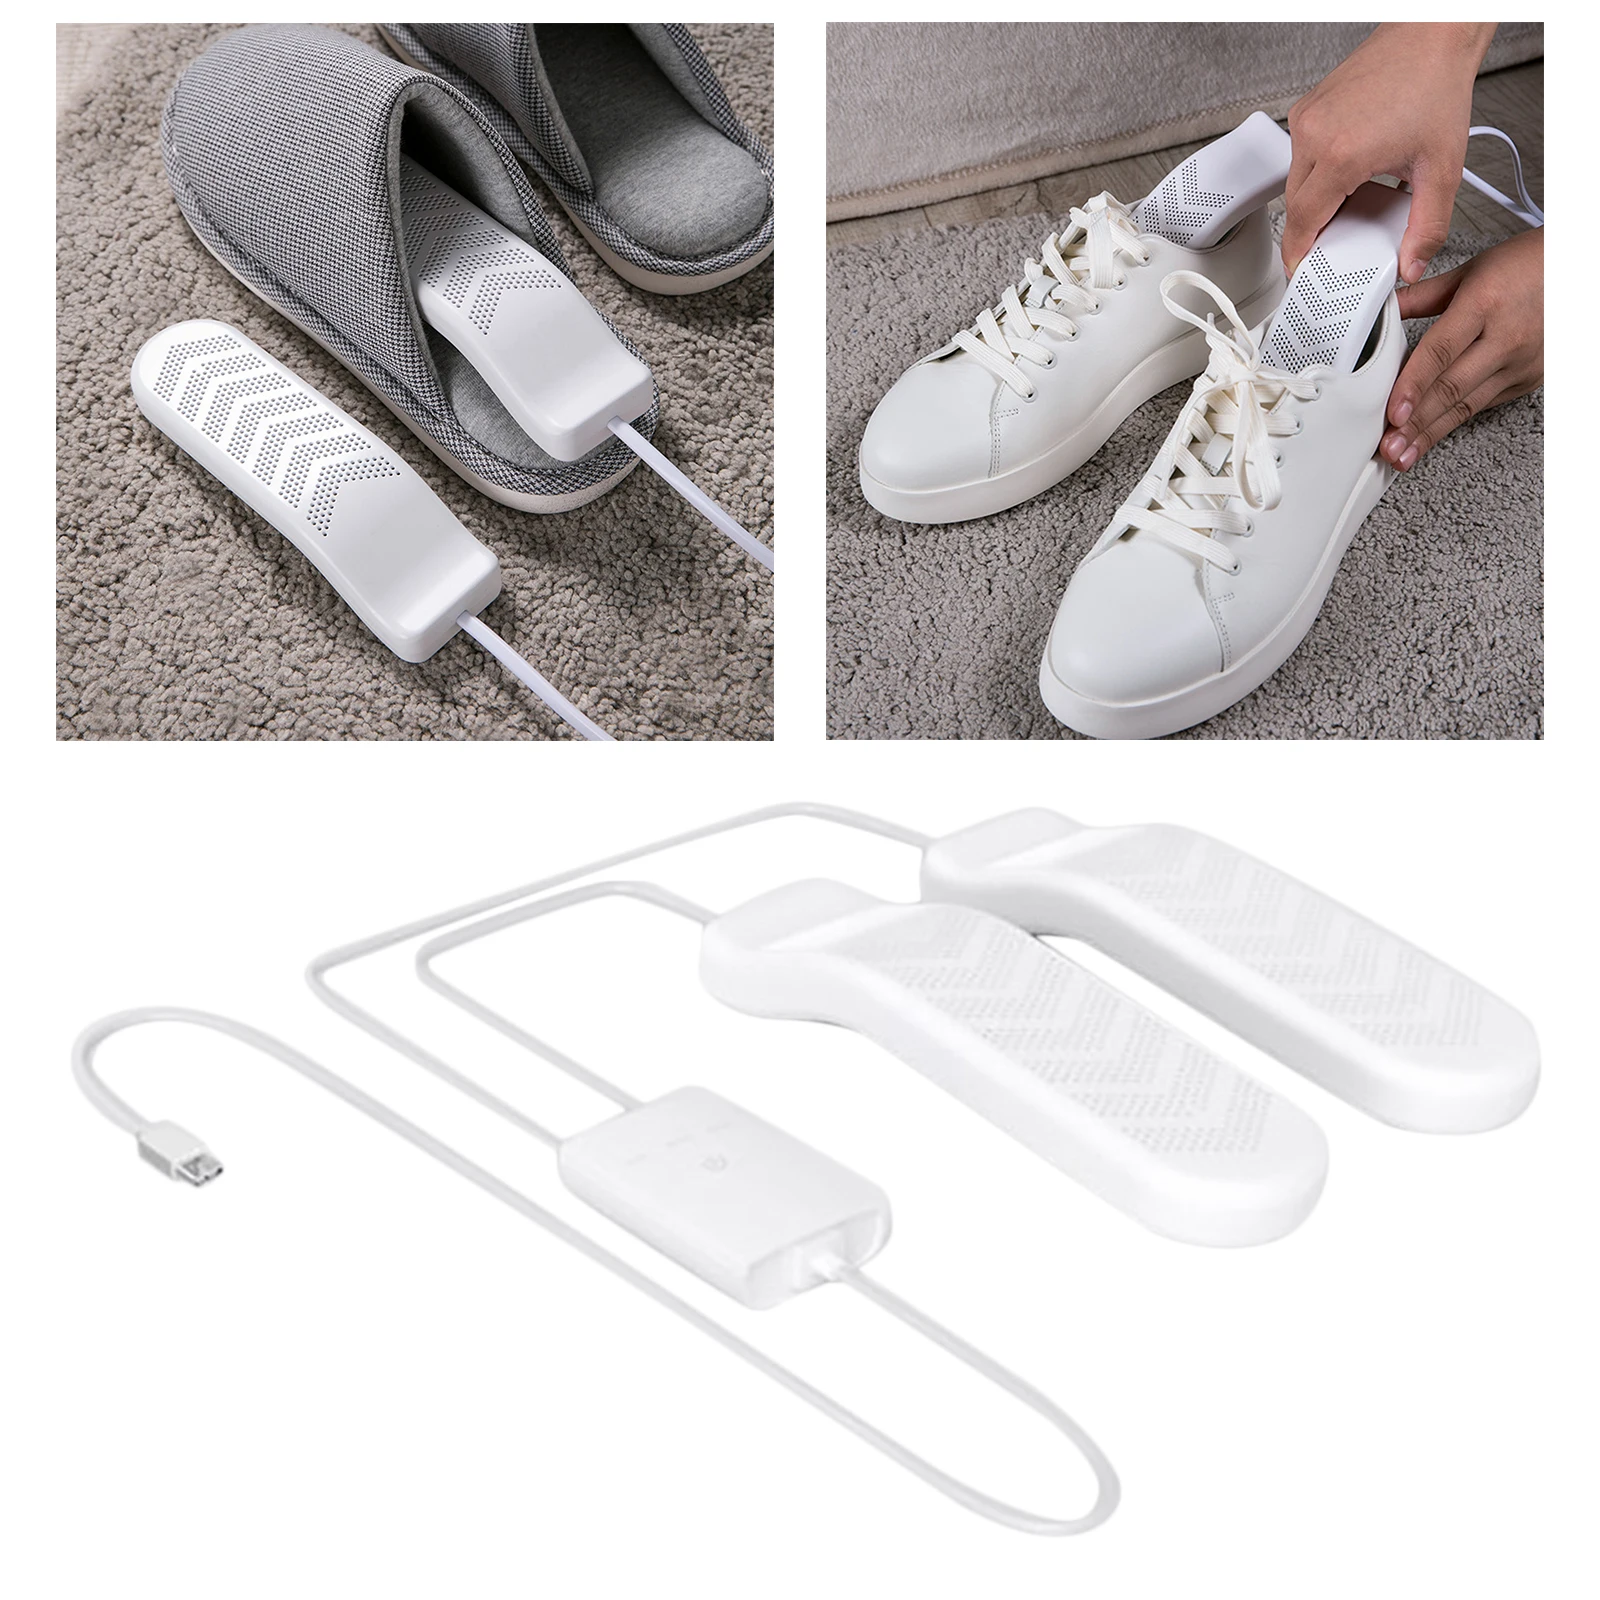 Portable Household USB Electric Boot Dryer Shoe Dryer Foot Dryer Timing Disinfection 5V